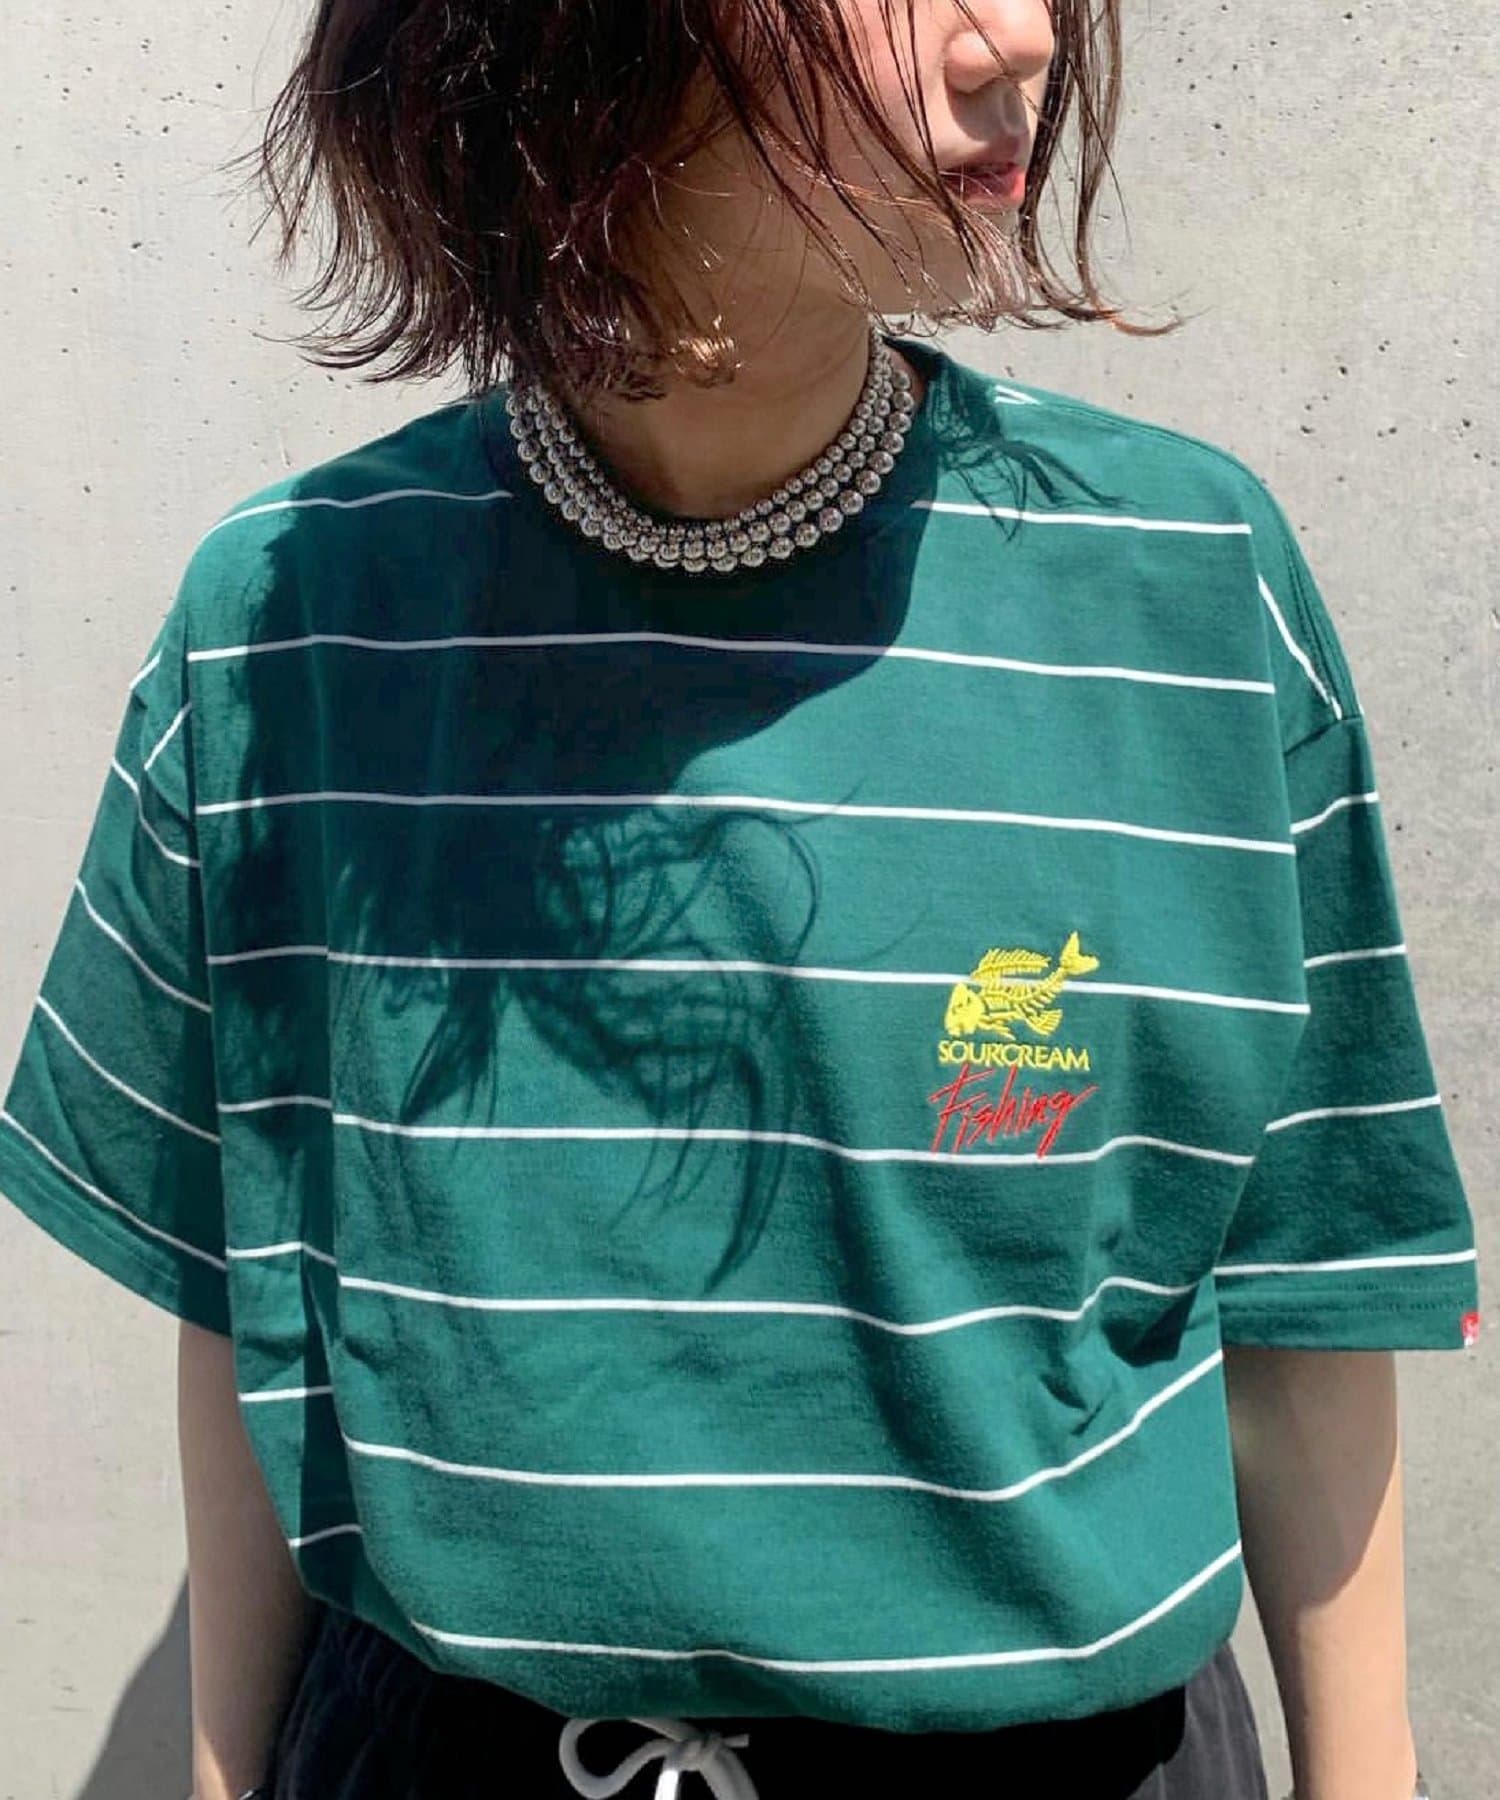 WHO’S WHO gallery(フーズフーギャラリー) 【Sourcream/サワークリーム】FISHボーダーTEE